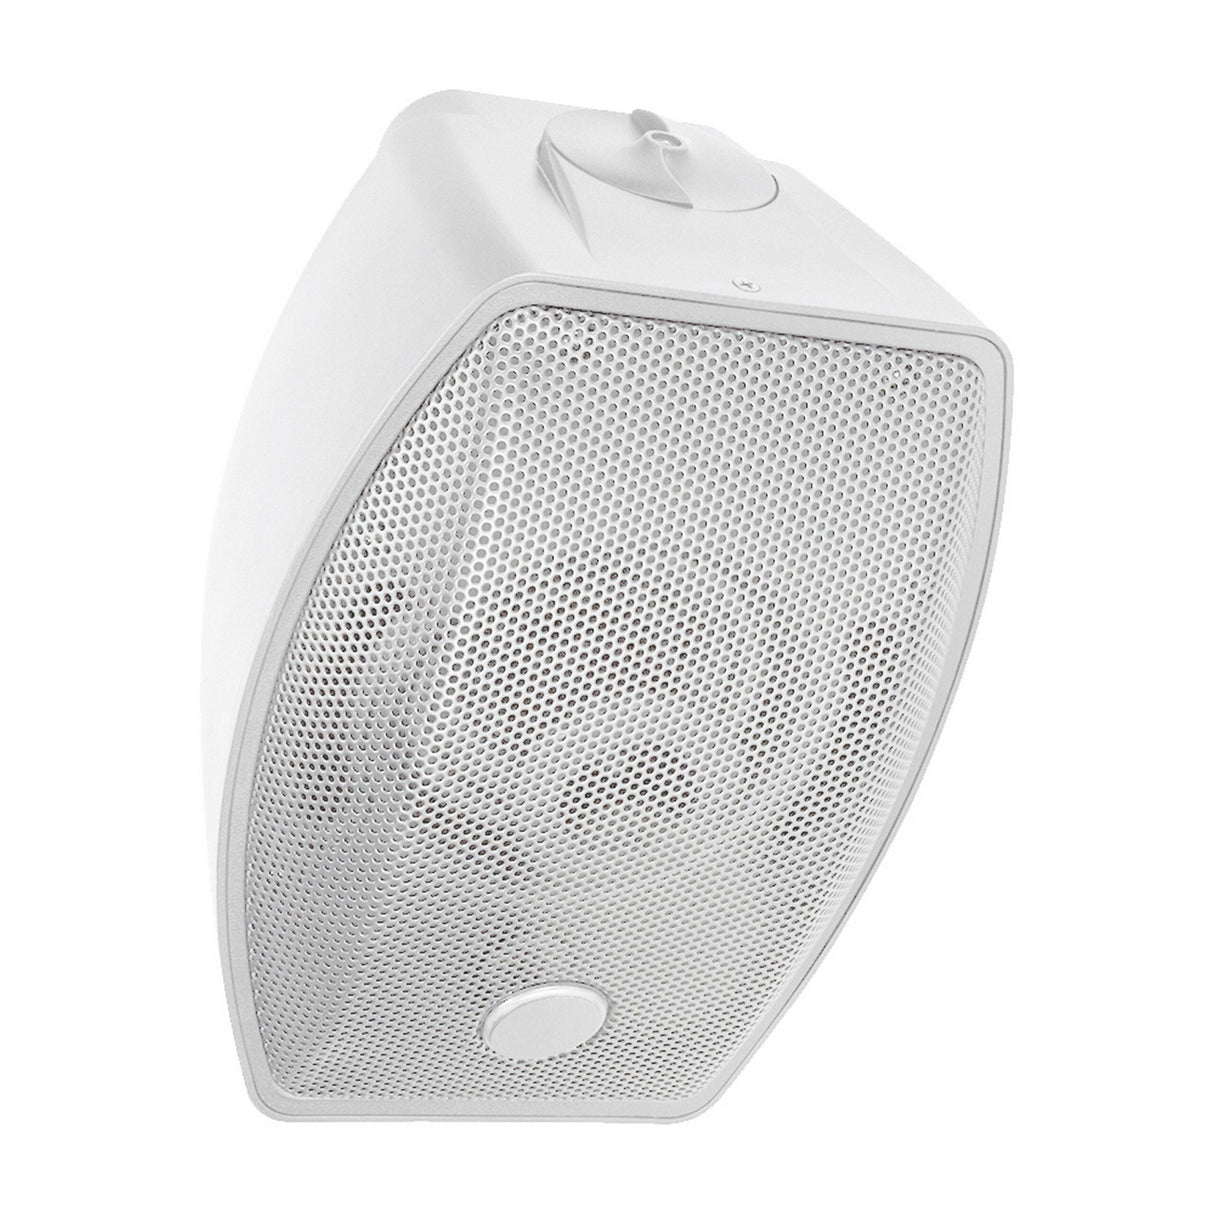 SoundTube SM590I-II-WX-WH 5.25-Inch 2-Way Extreme Weather Outdoor Surface Mount Speaker, White